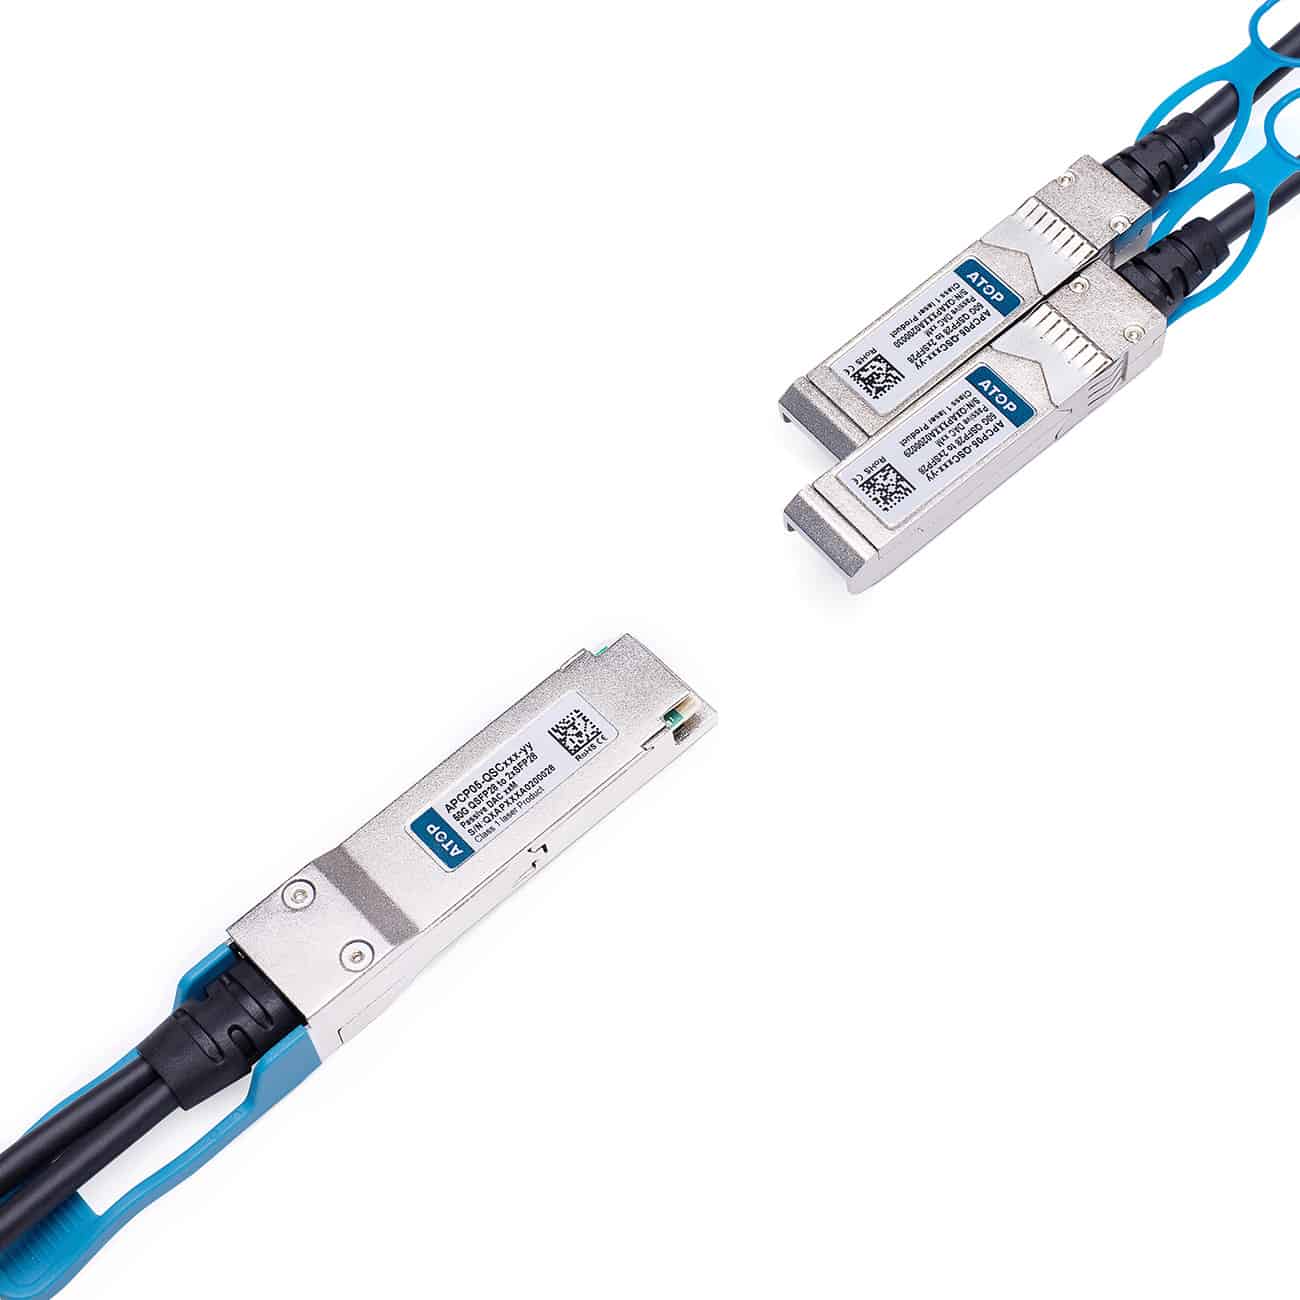 QSFP28 to 2xSFP28 Passive Cable